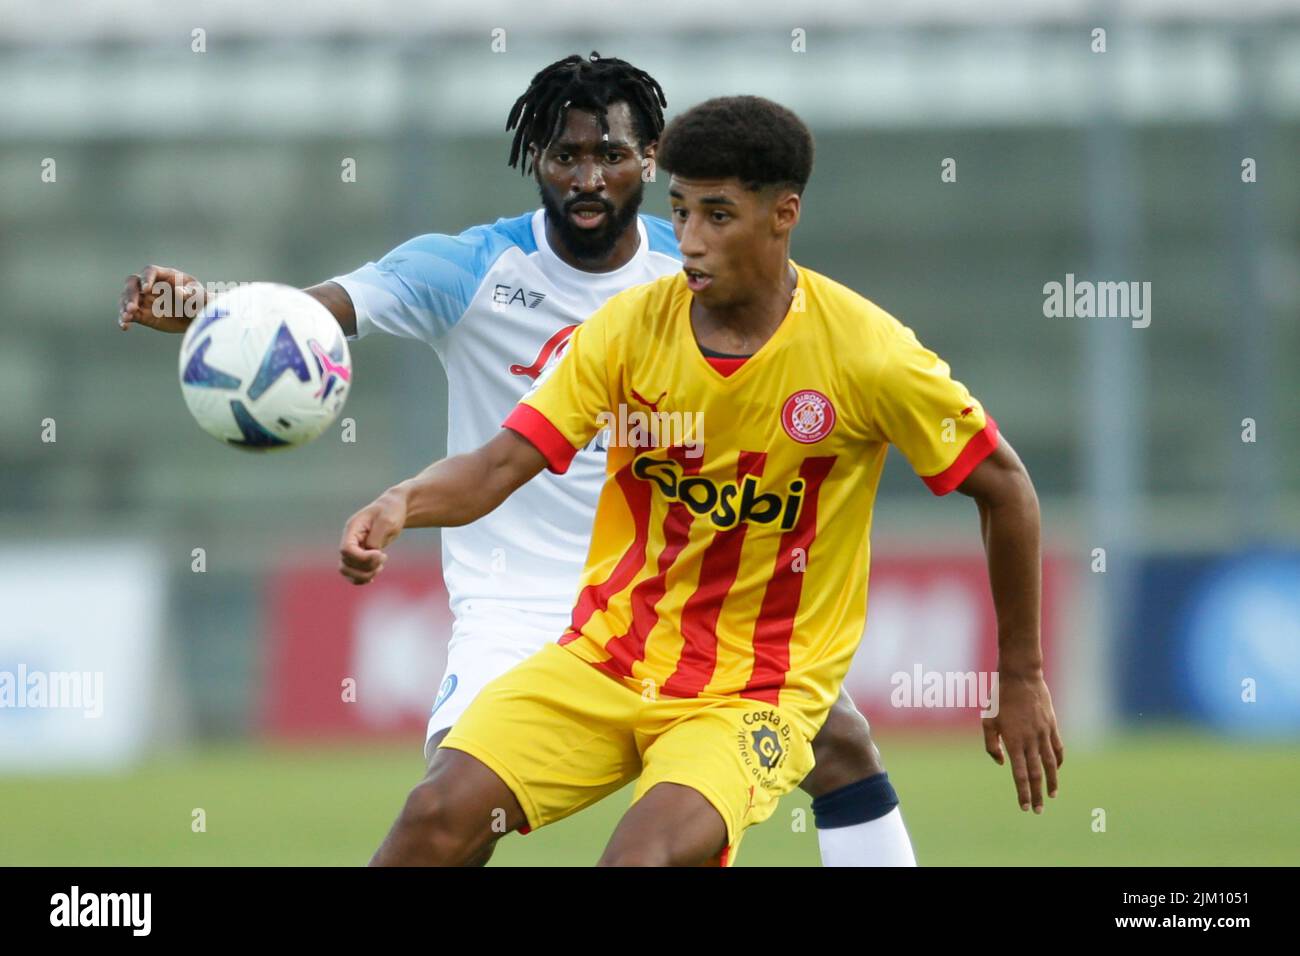 SSC Napoli's Cameroonian striker Andre Zambo Anguissa challenges for the ball with Girona's forward Oscar Urena during friendly match SSC Napoli Girona at the SSC Napoli's 2022-23 pre-season training camp in Castel di Sangro Stock Photo